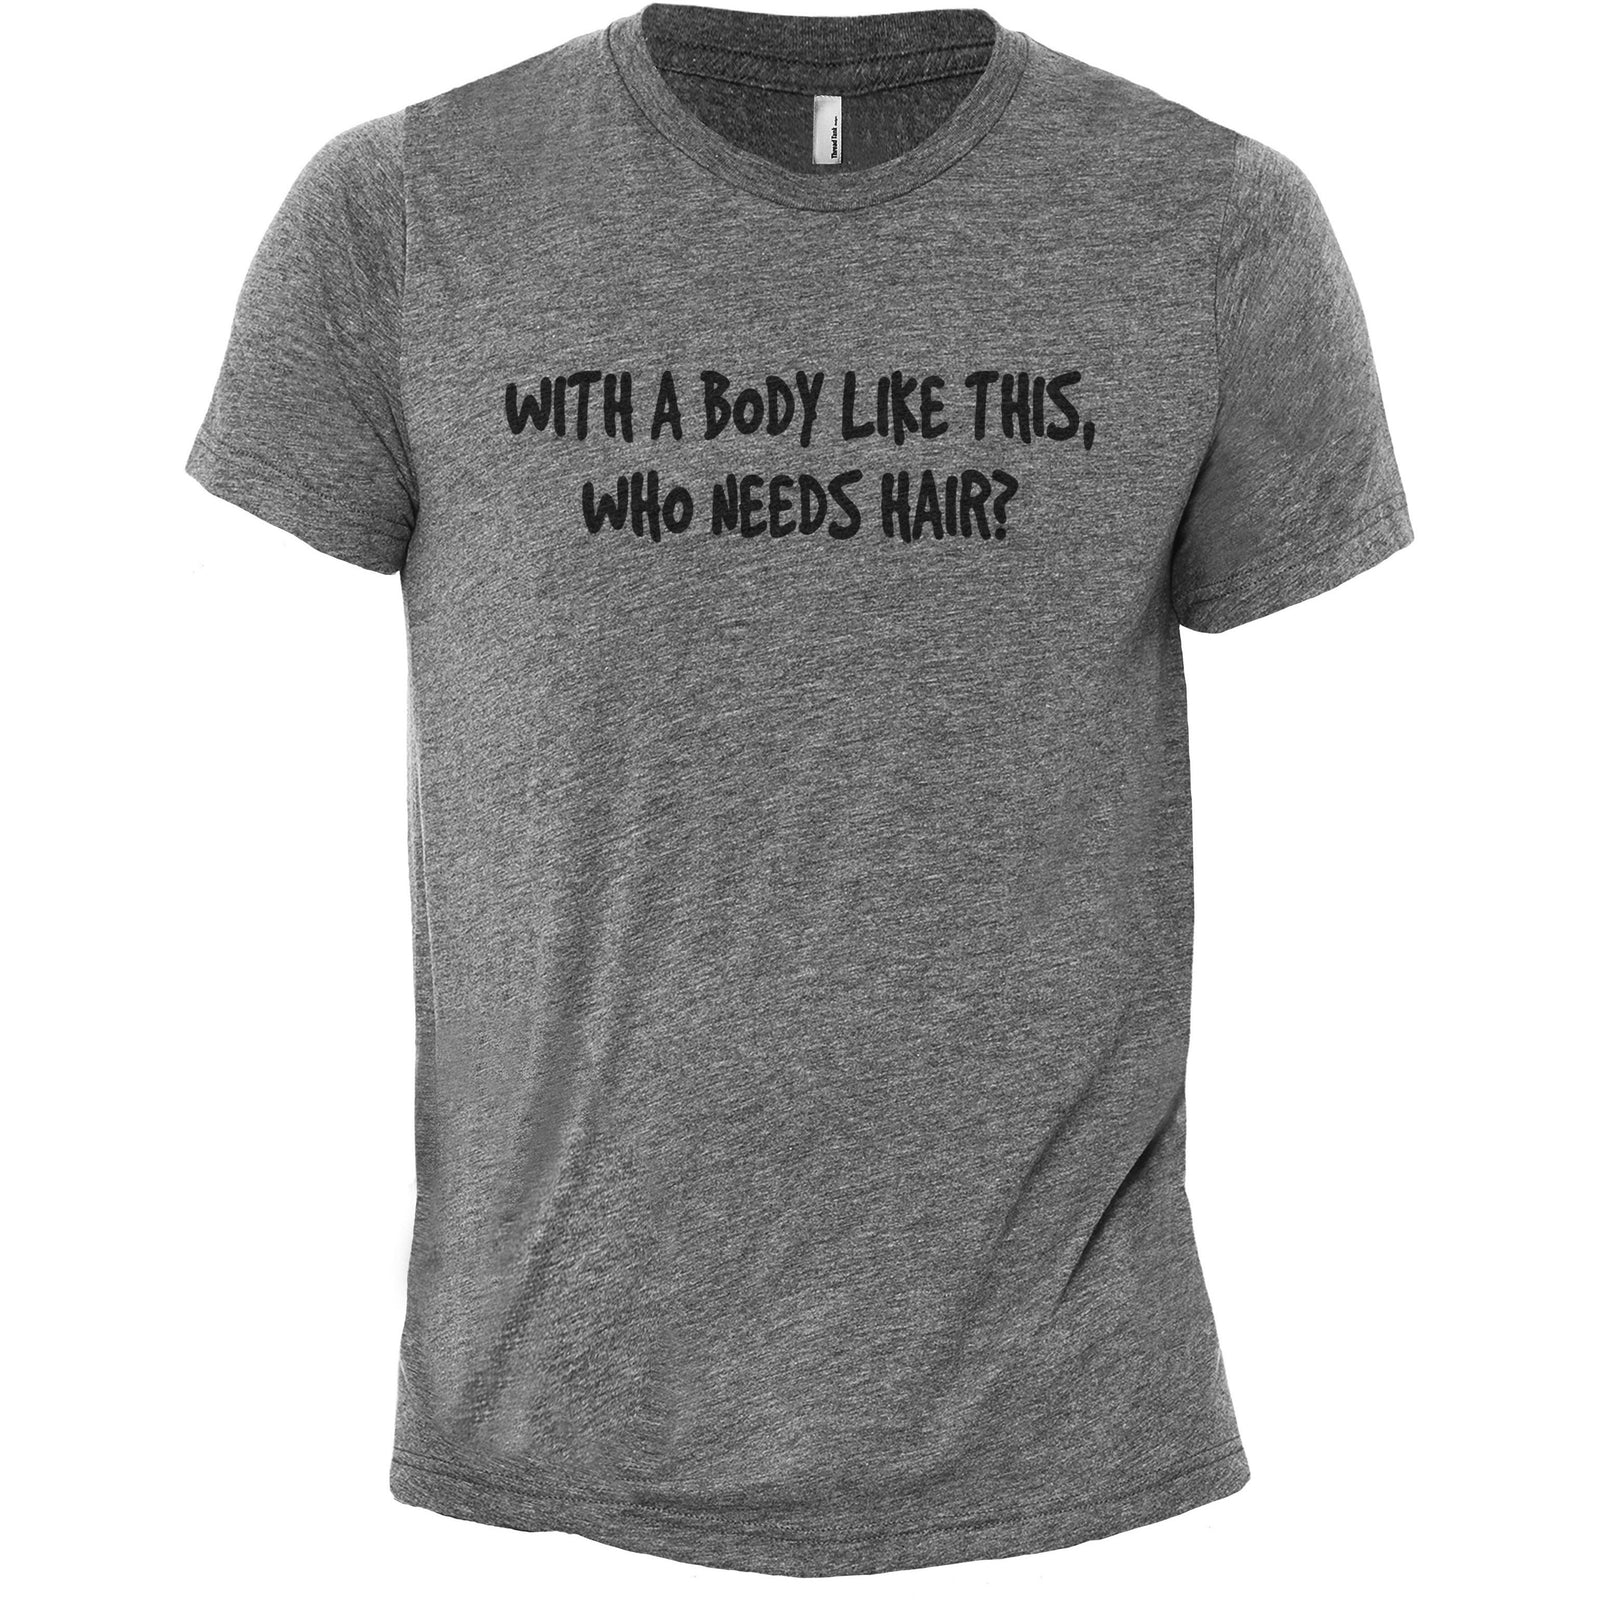 With A Body Like This Who Needs Hair Heather Grey Printed Graphic Men's Crew T-Shirt Tee